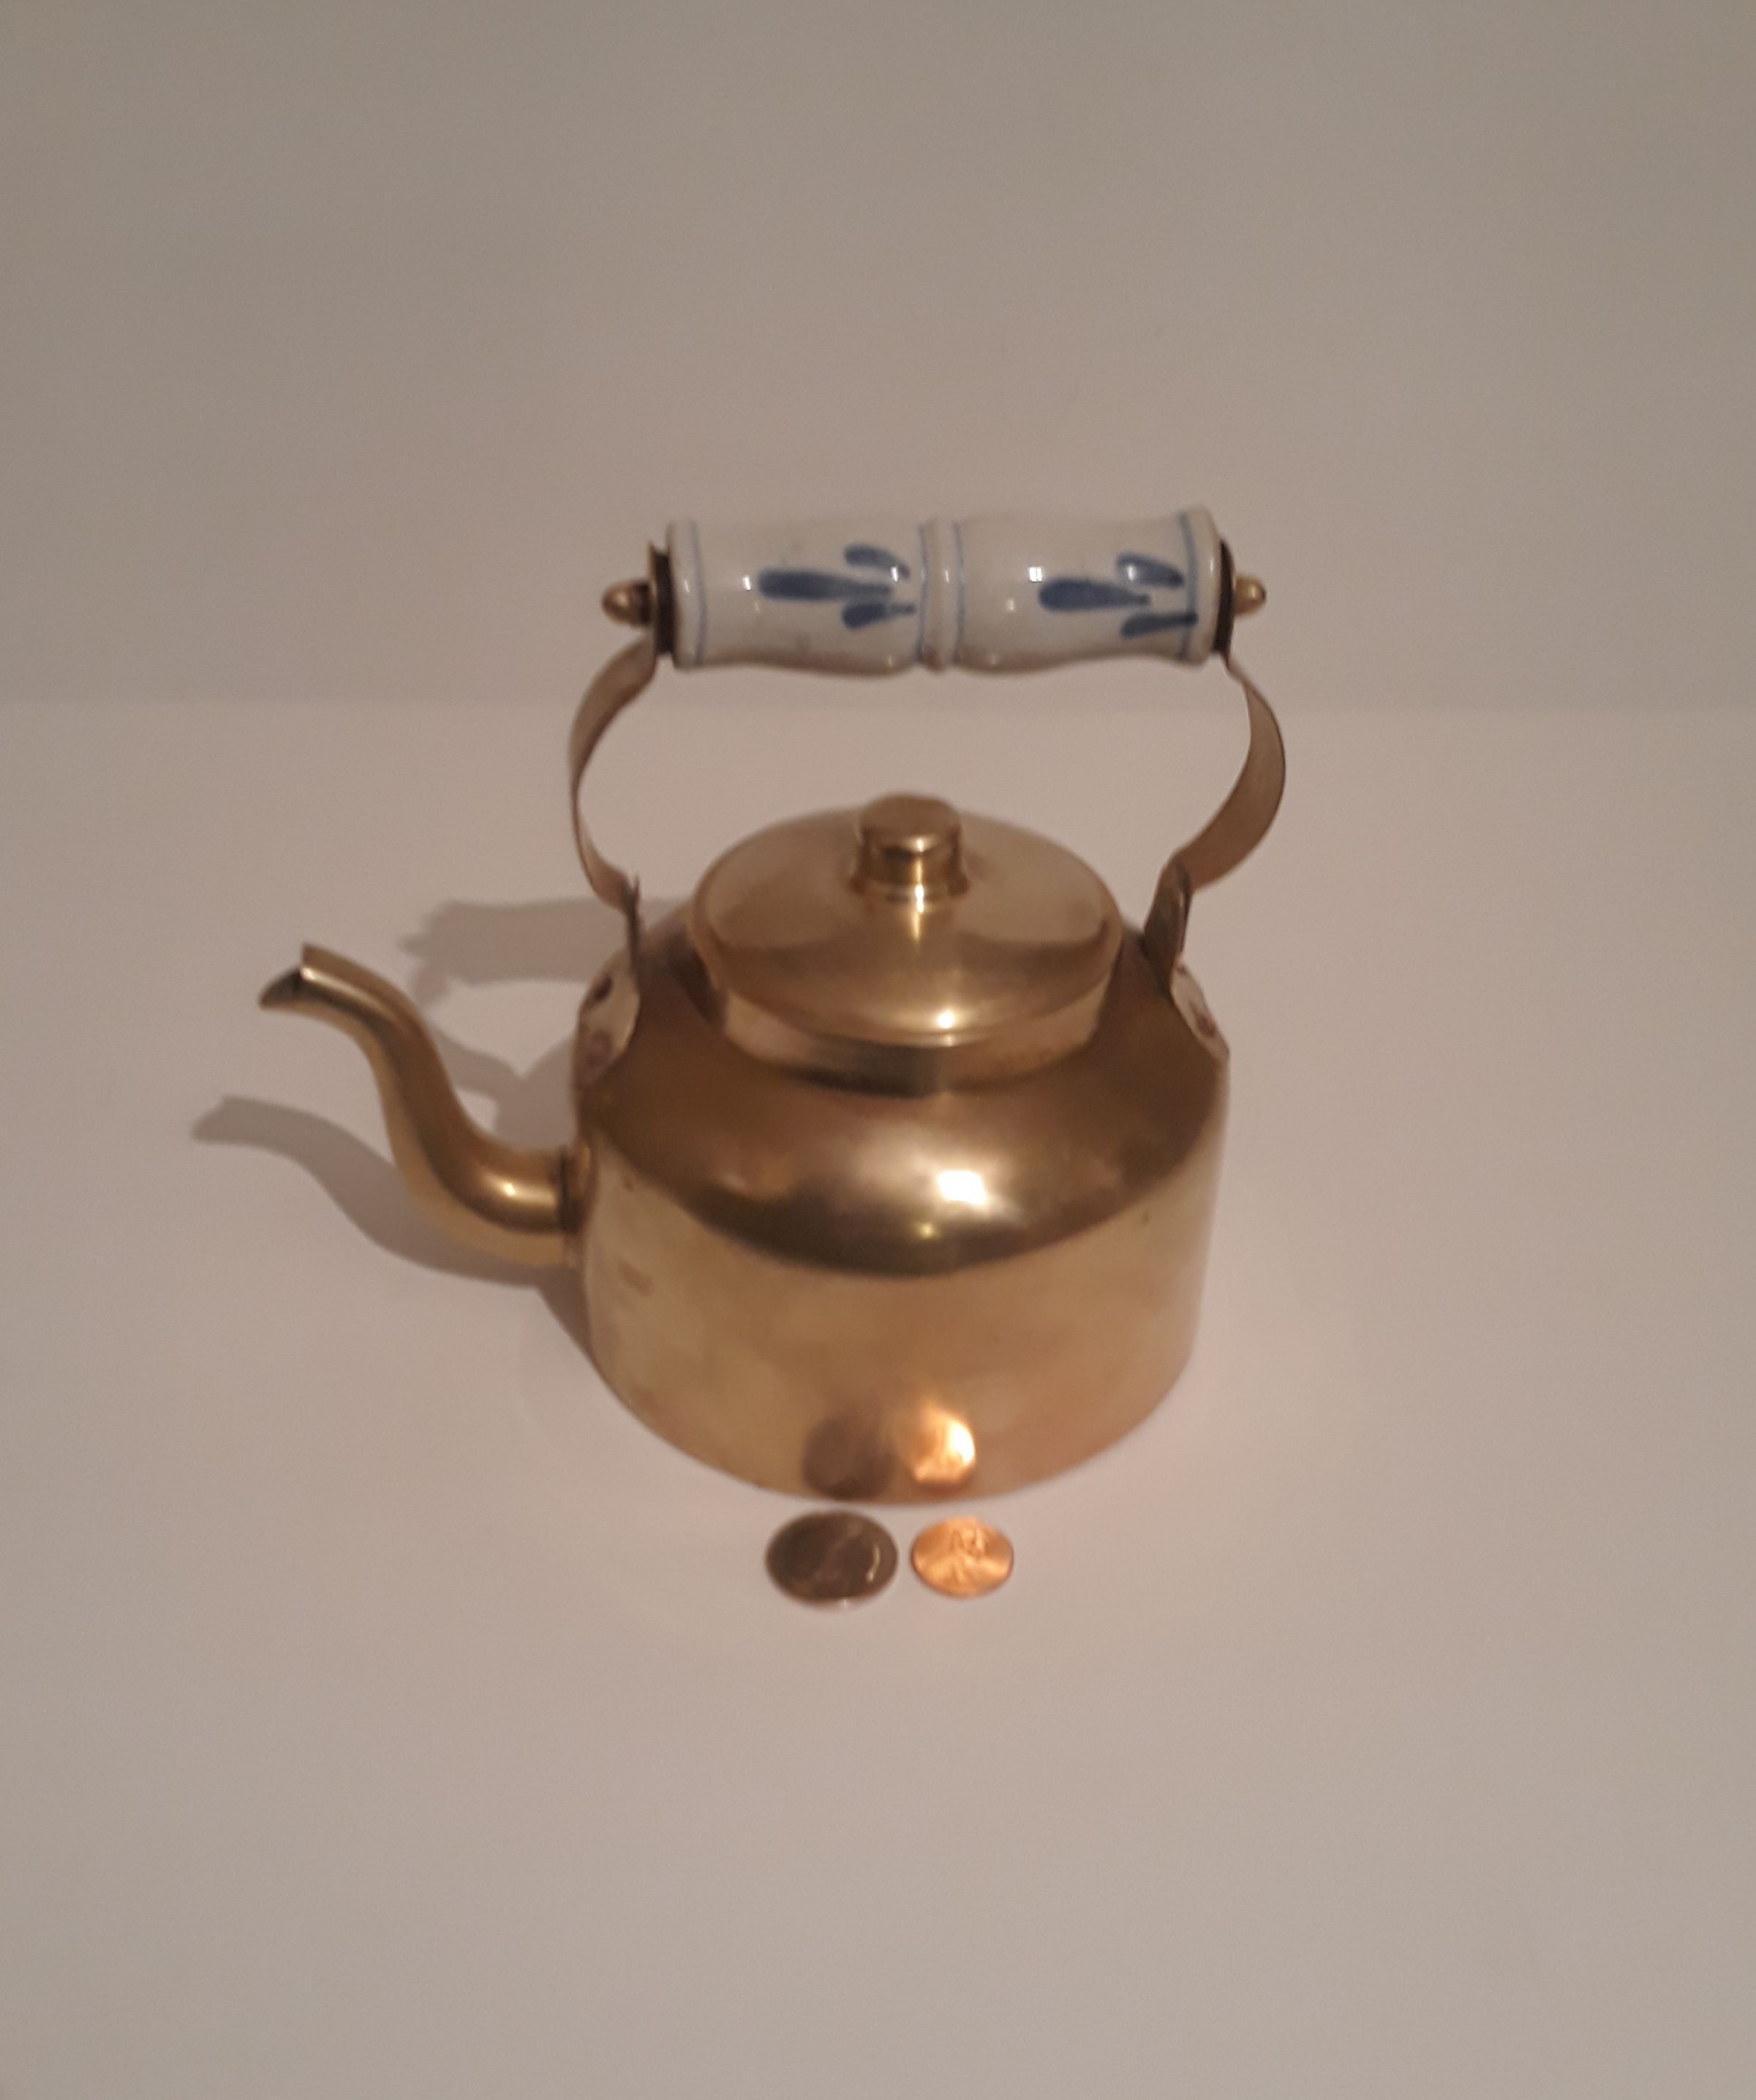 Vintage Metal Brass Teapot, Tea Kettle with Porcelain Handle, 7" x 5", Kitchen Decor, Table Display, Shelf Display, This Can Be Shined Up Even More